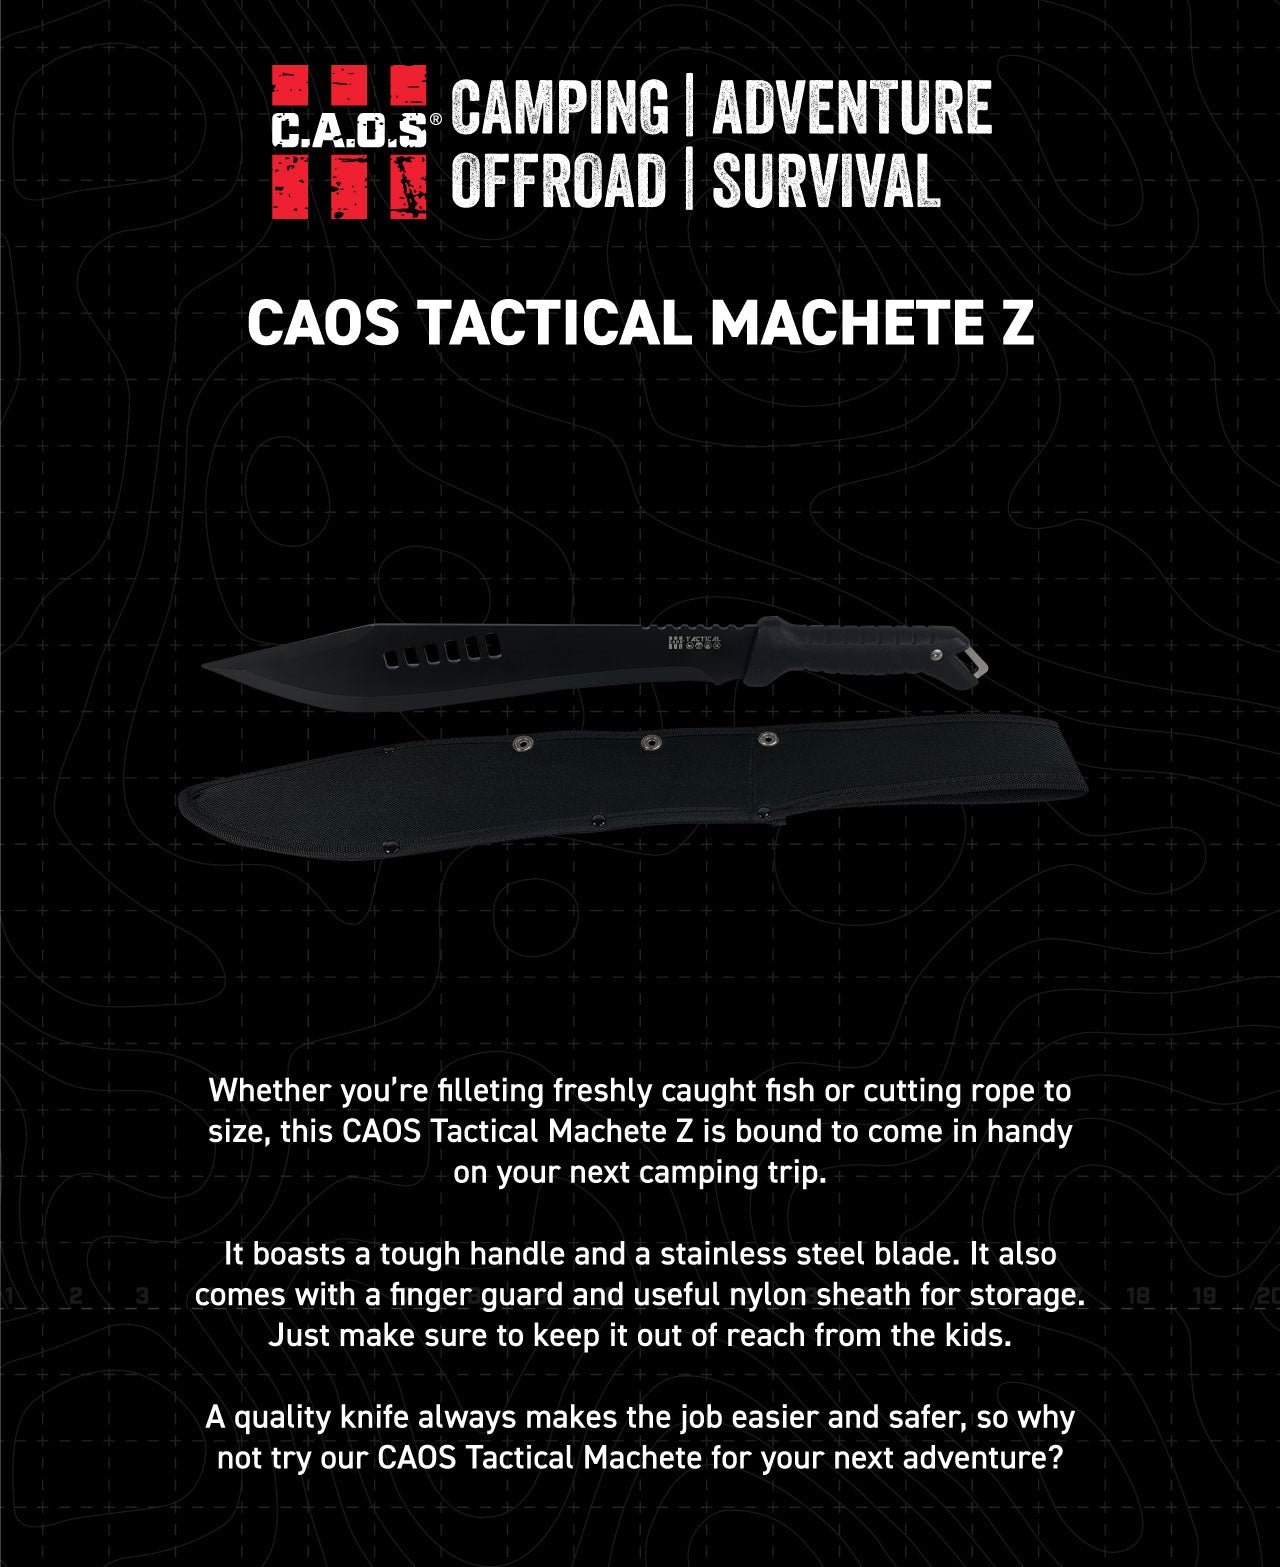 Whether you’re filleting freshly caught fish or cutting rope to size, this CAOS Tactical Machete Z is bound to come in handy on your next camping trip. It boasts a tough handle and a stainless steel blade. It also comes with a finger guard and useful nylon sheath for storage. Just make sure to keep it out of reach from the kids. A quality knife always makes the job easier and safer, so why not try our CAOS Tactical Machete for your next adventure?